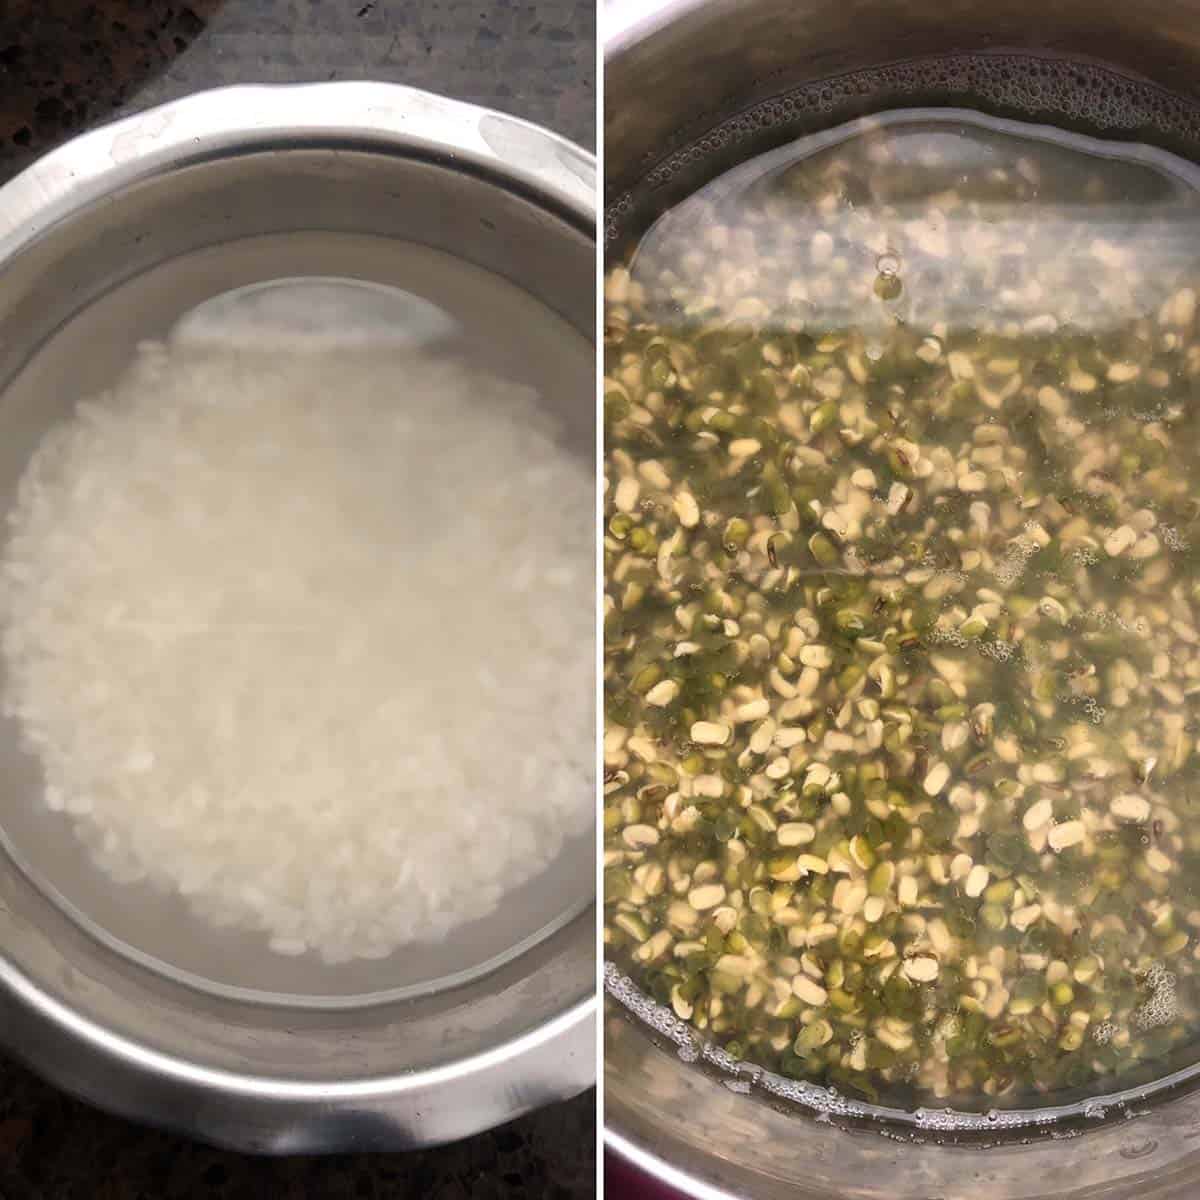 Side by side photos of rice and moong dal soaking in water